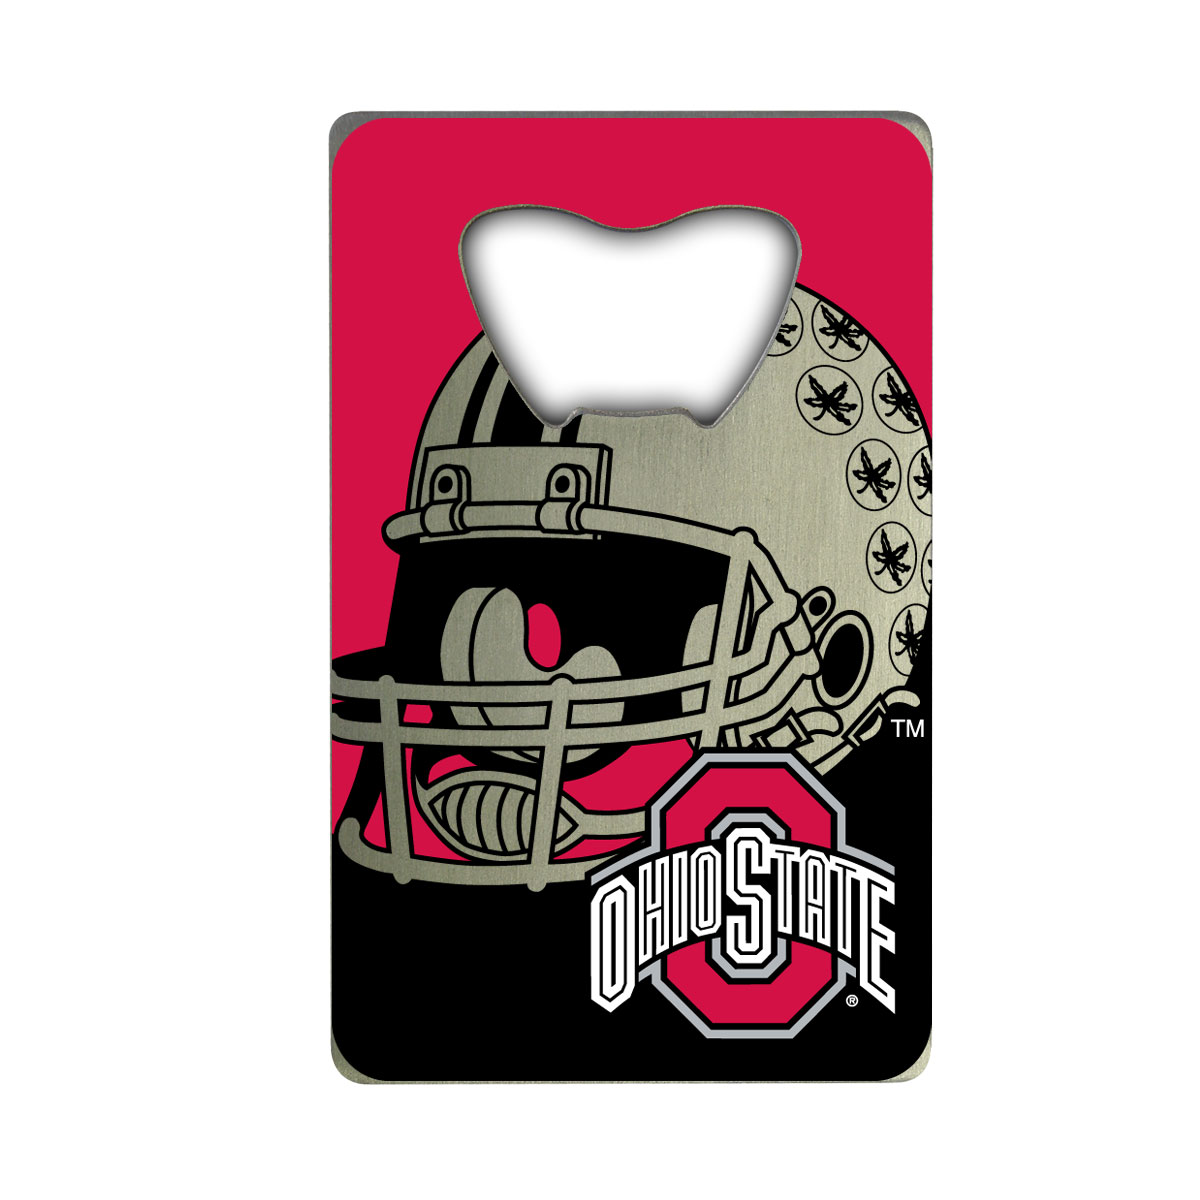 Ohio State Buckeyes Bottle Opener Credit Card Style - Special Order